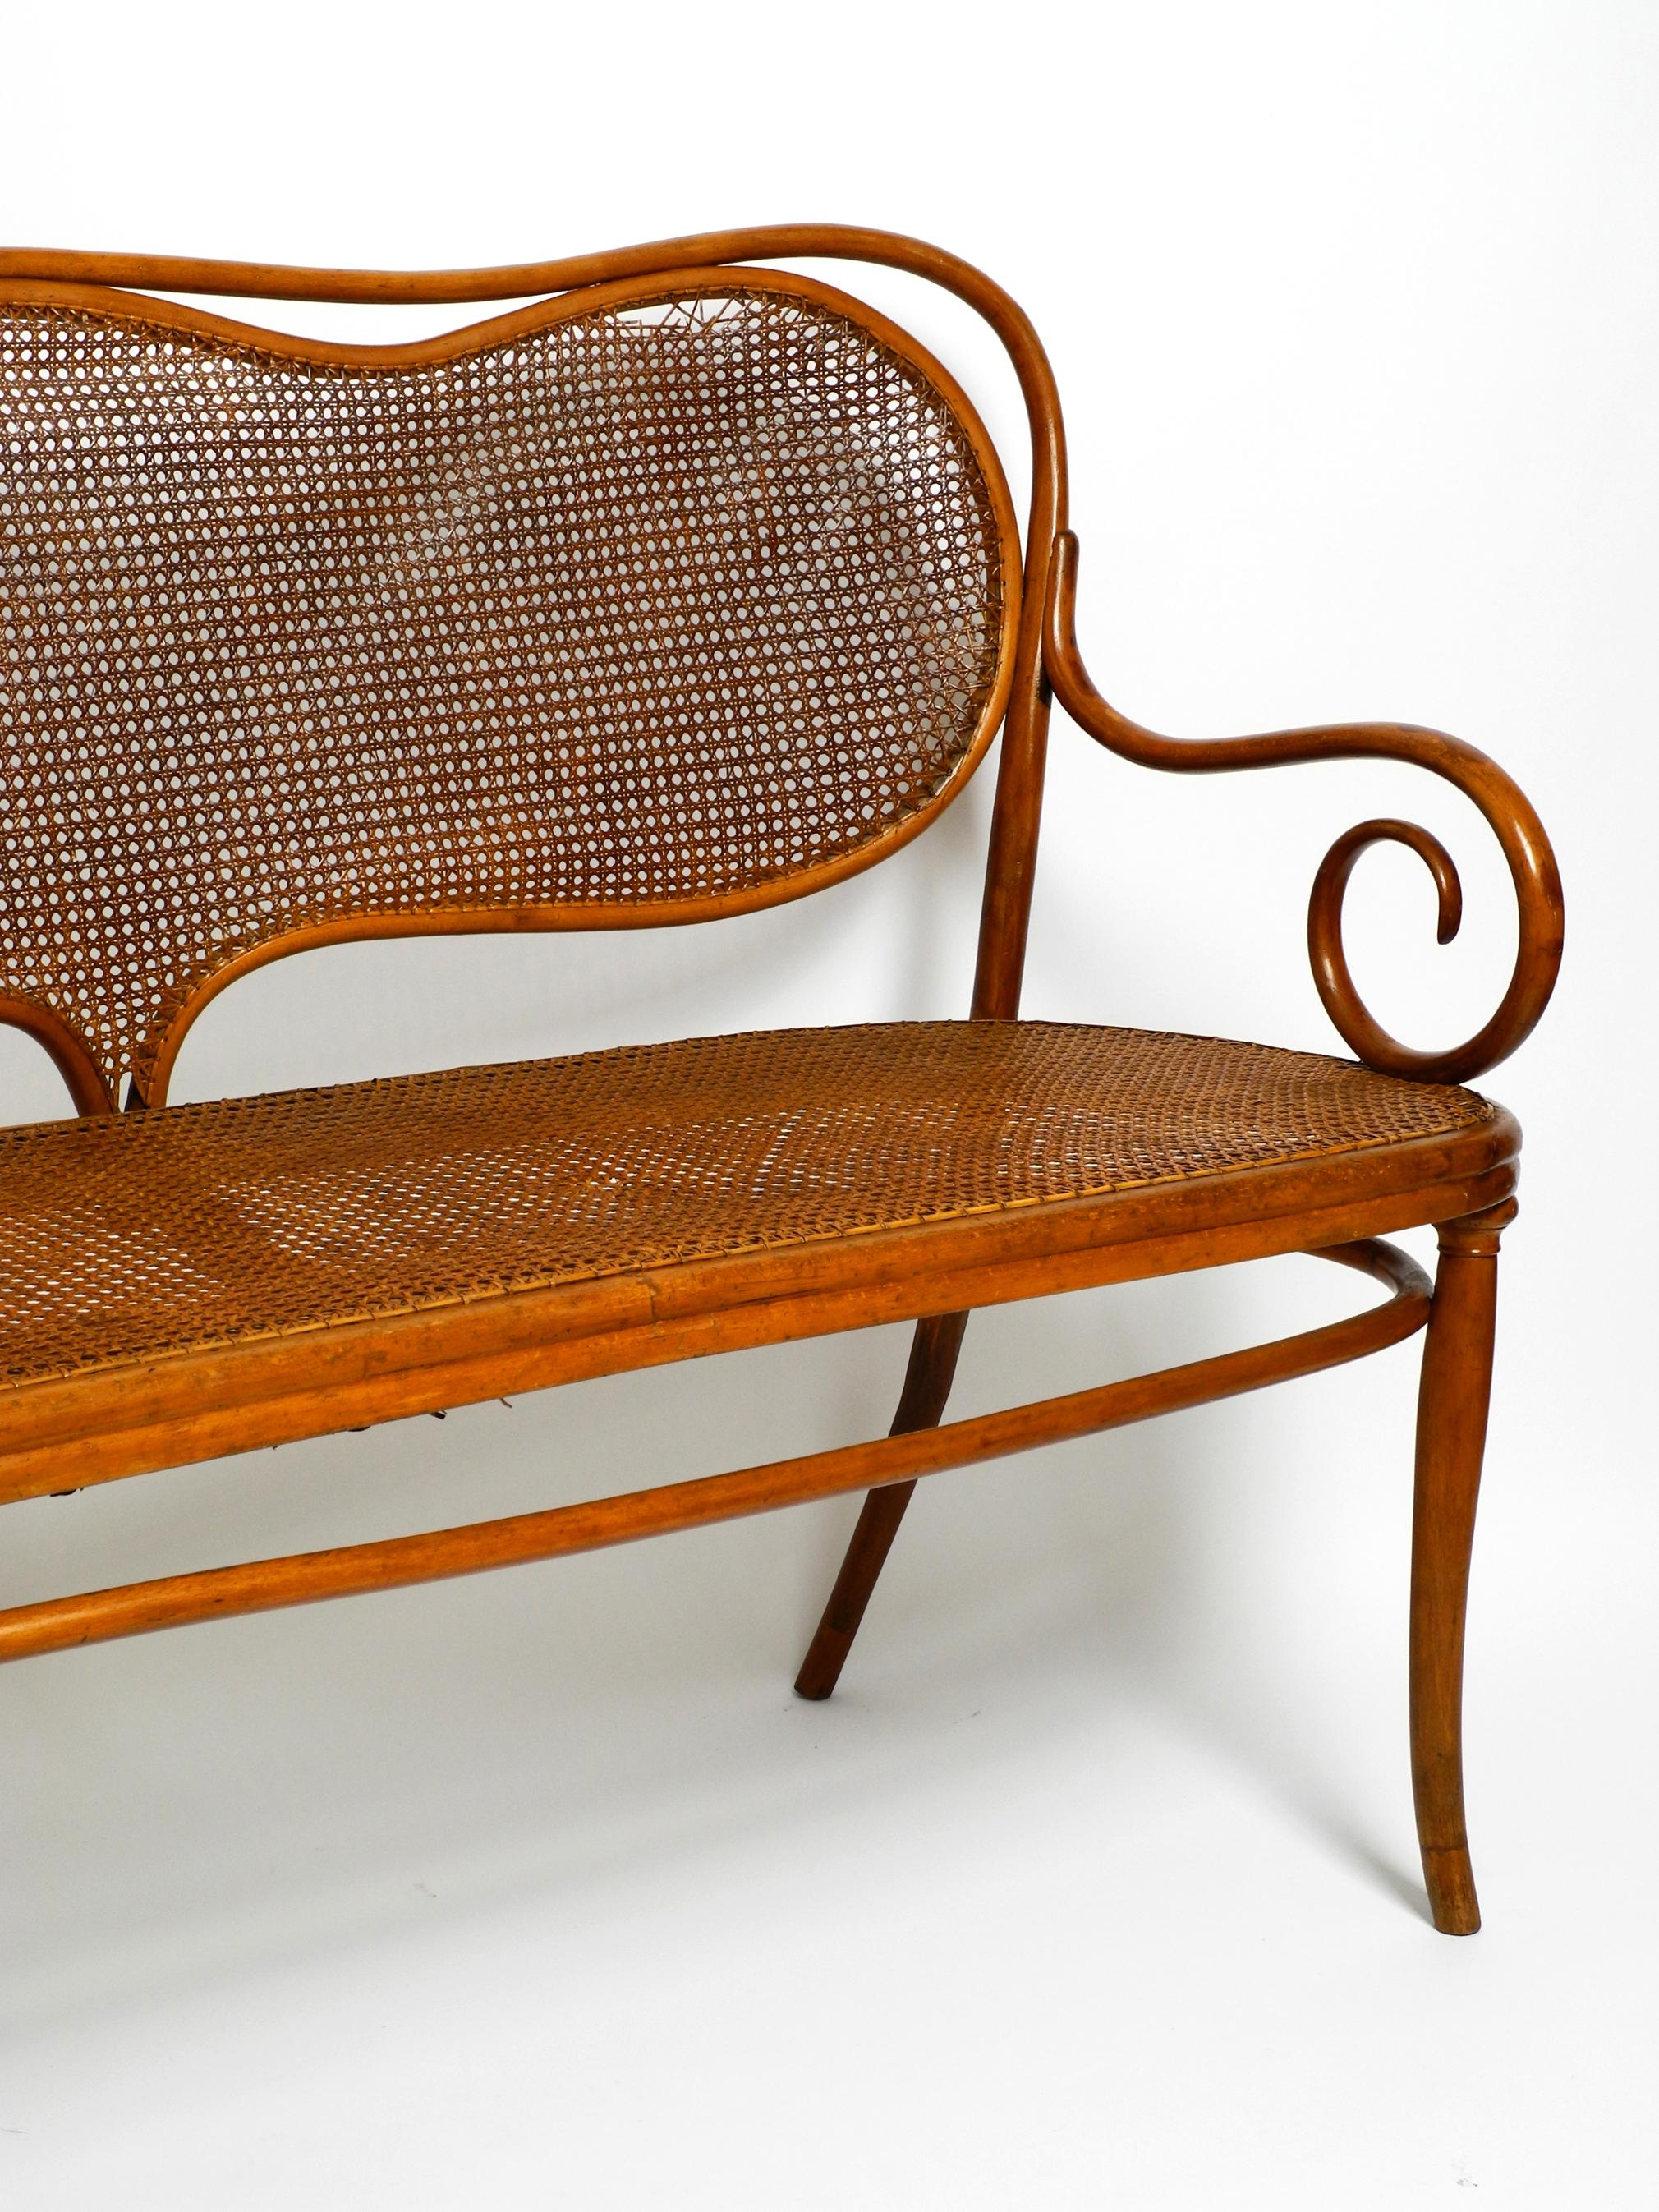 Bench No. 5 Thonet 1858 made of bent beech and wickerwork | restoration needed For Sale 12